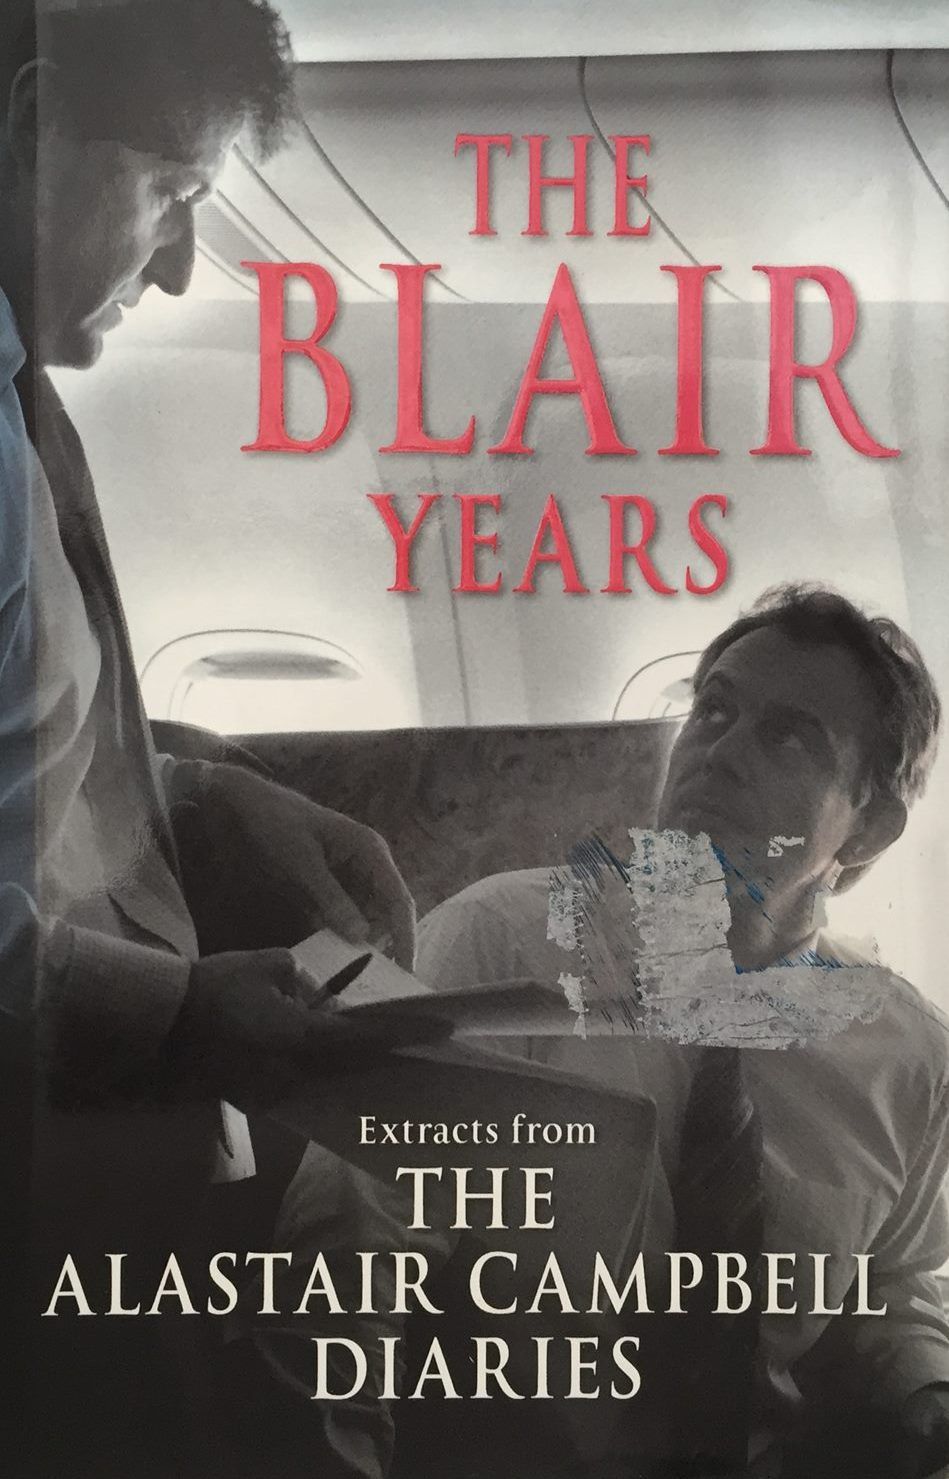 THE BLAIR YEARS: Extracts From The Alastair Campbell Diaries